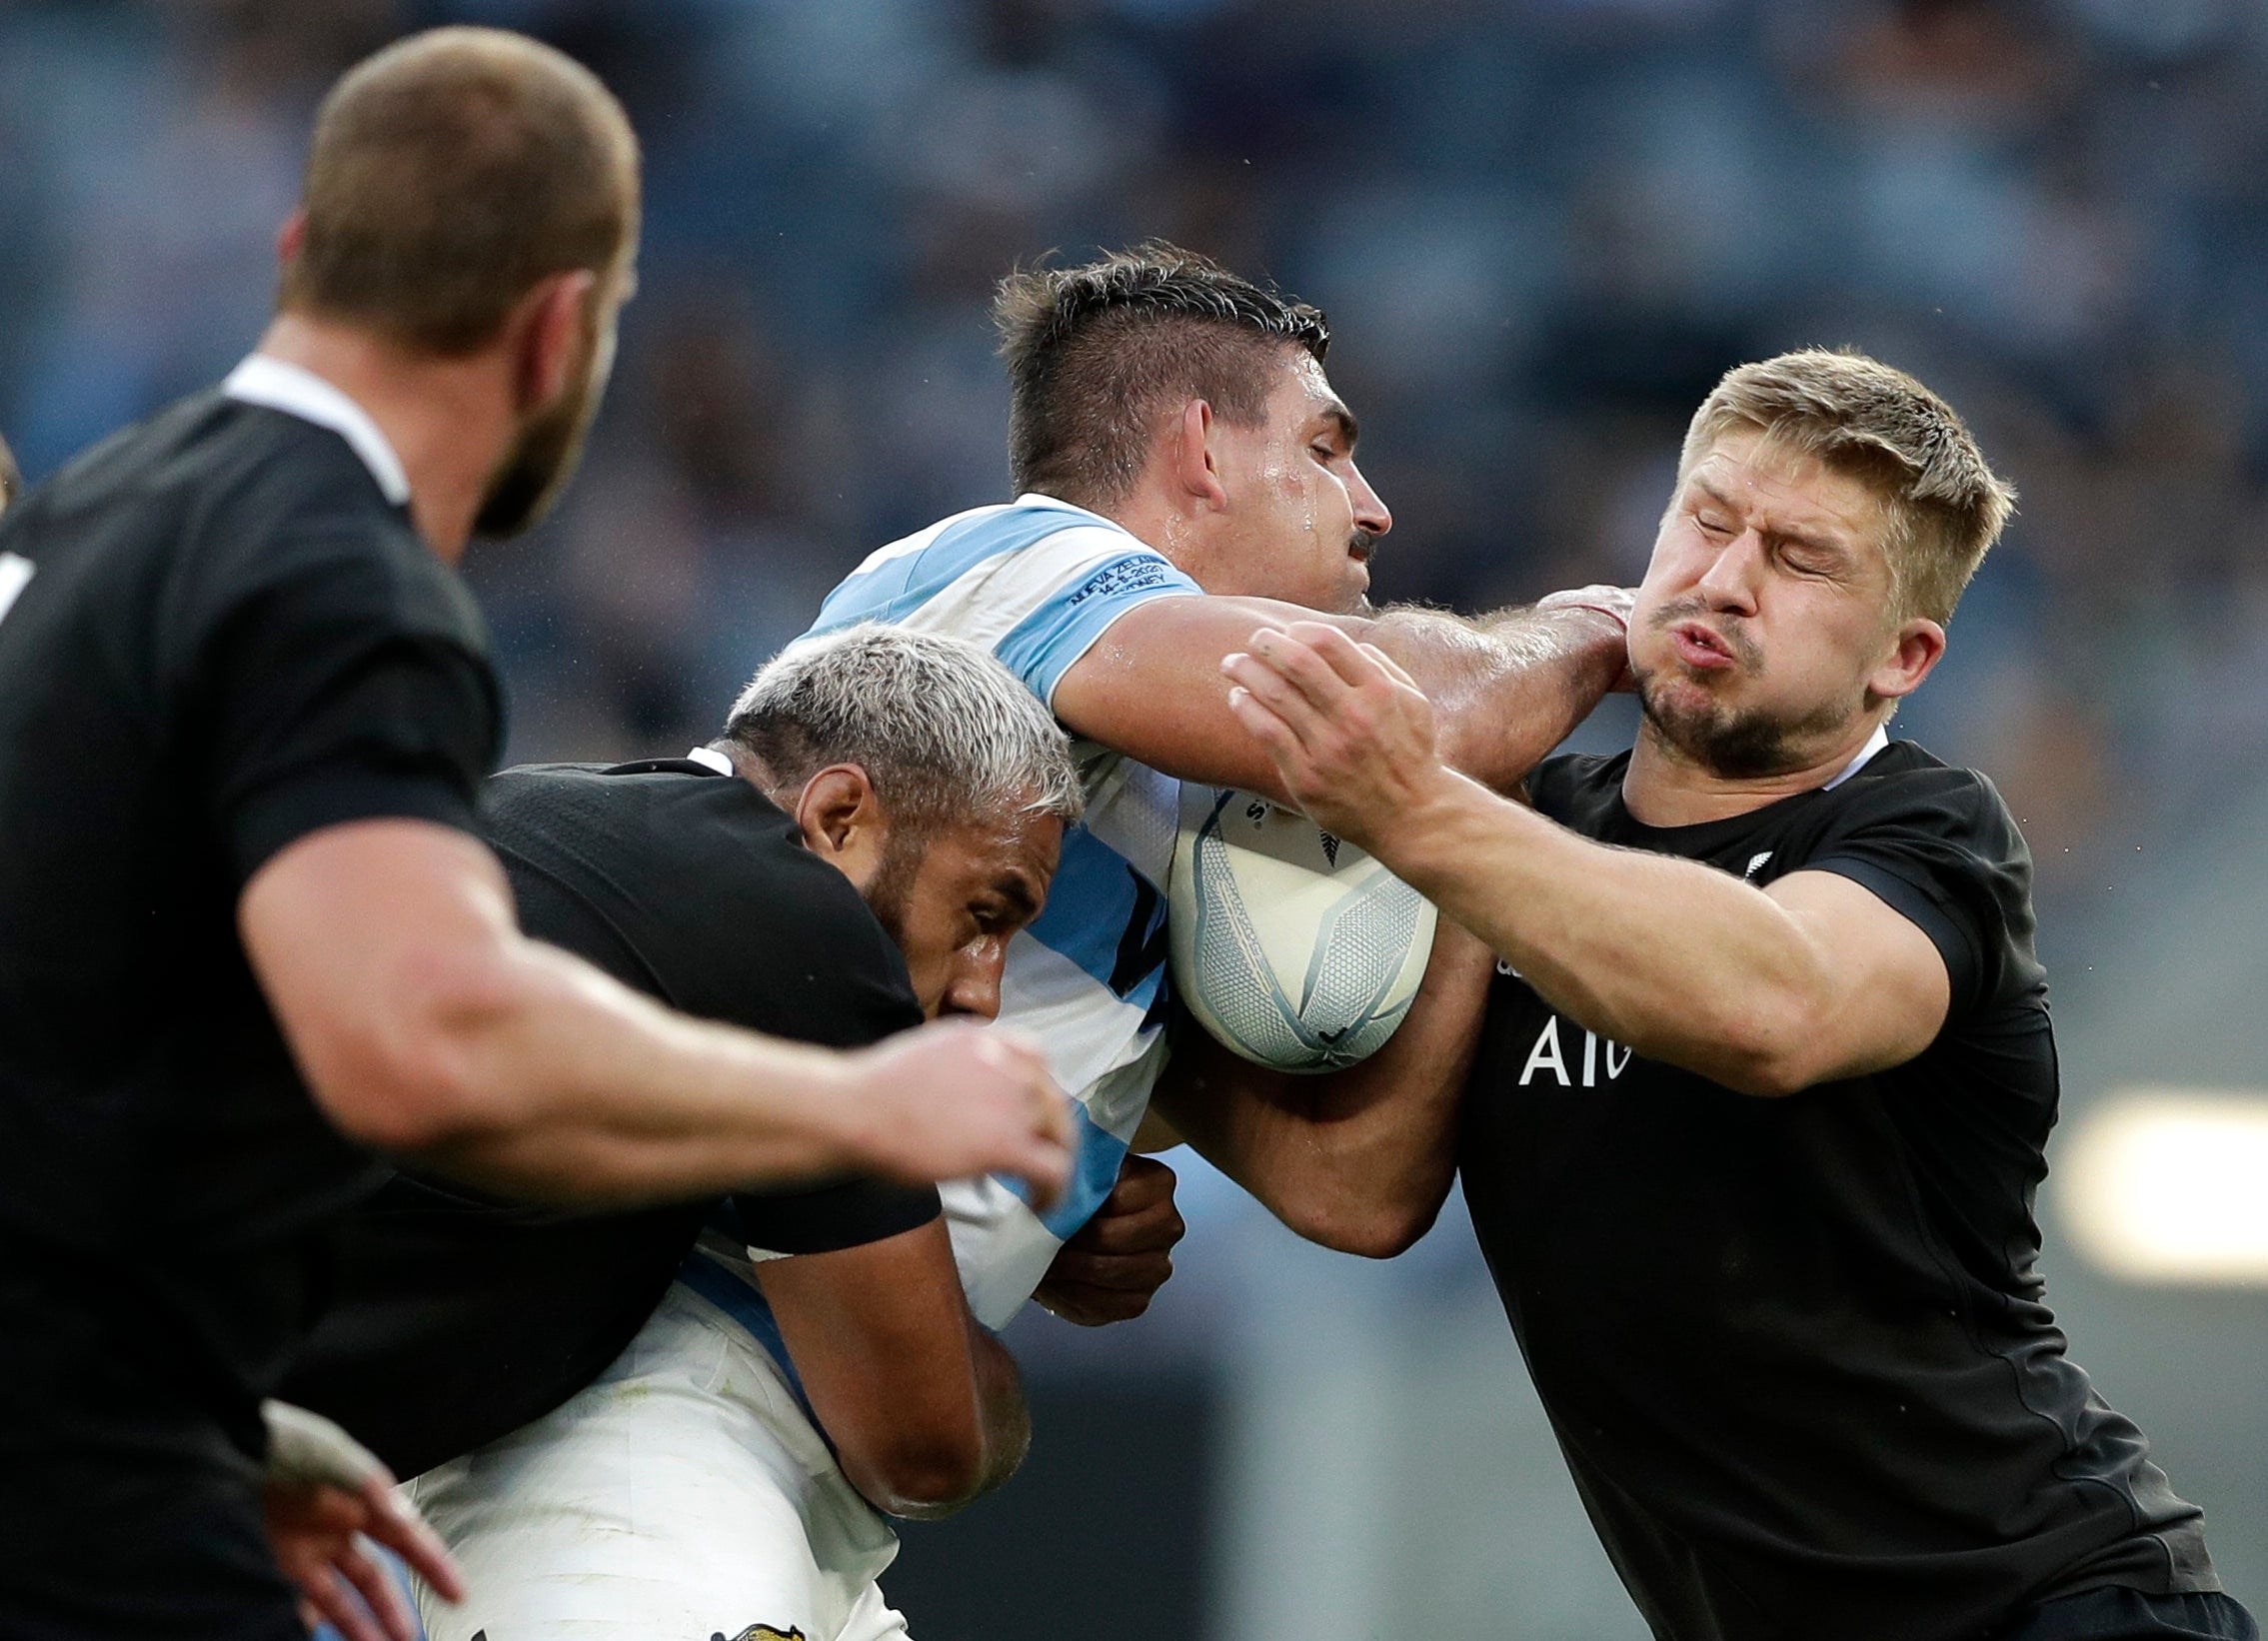 Matera has been stripped of the captaincy little more than two weeks since leading the side to a first win over New Zealand